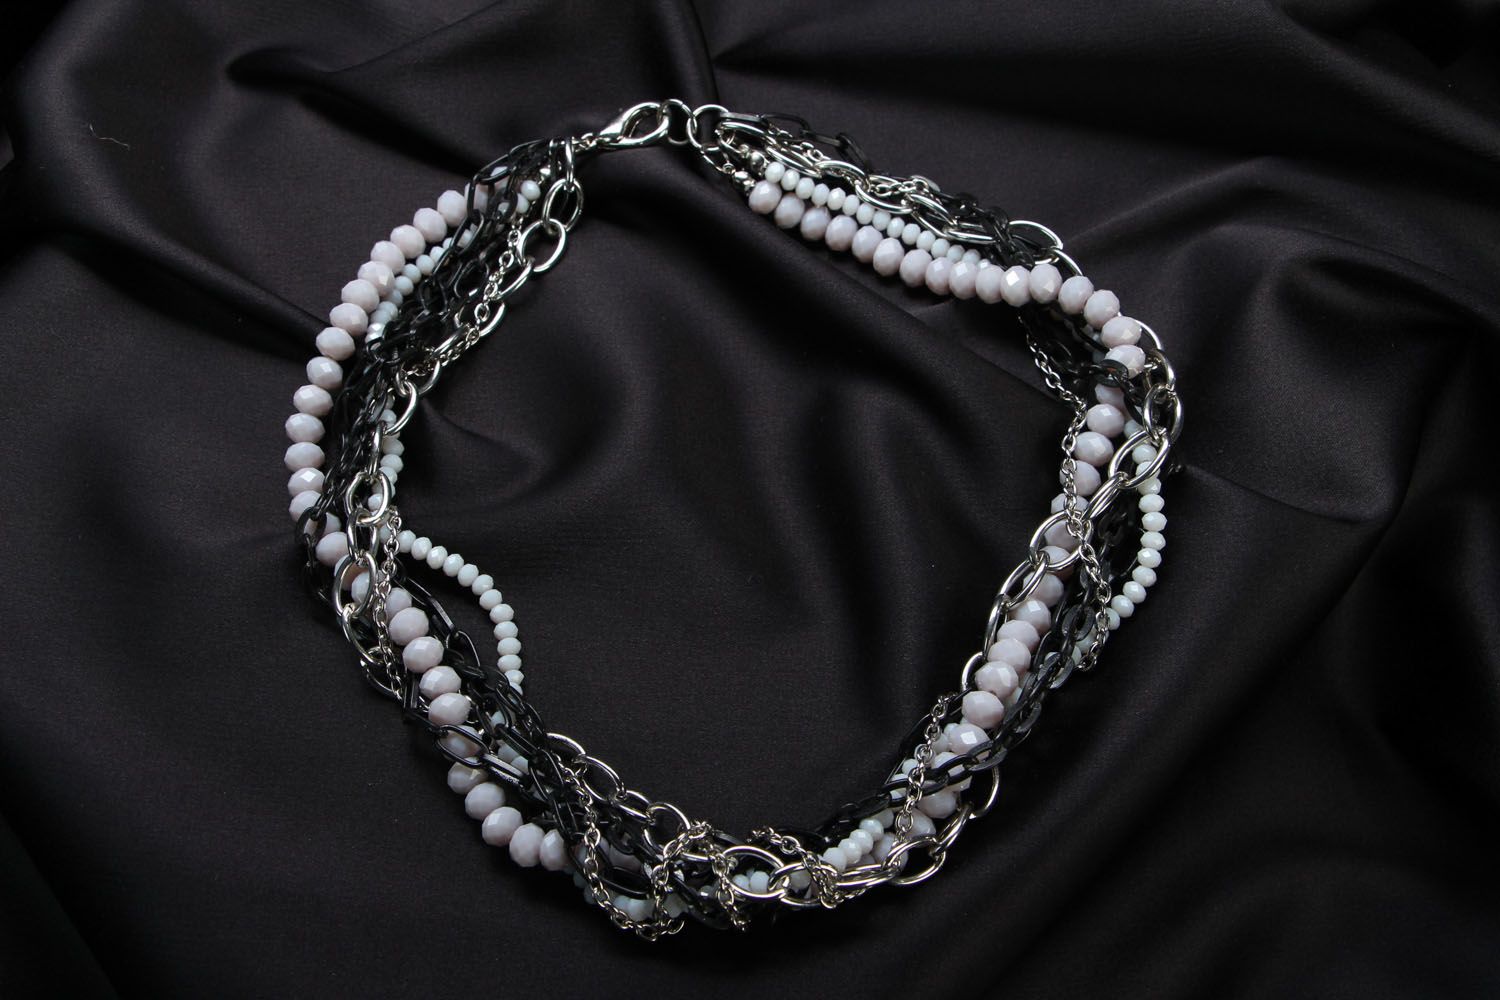 Handmade necklace with crystal and chains photo 1